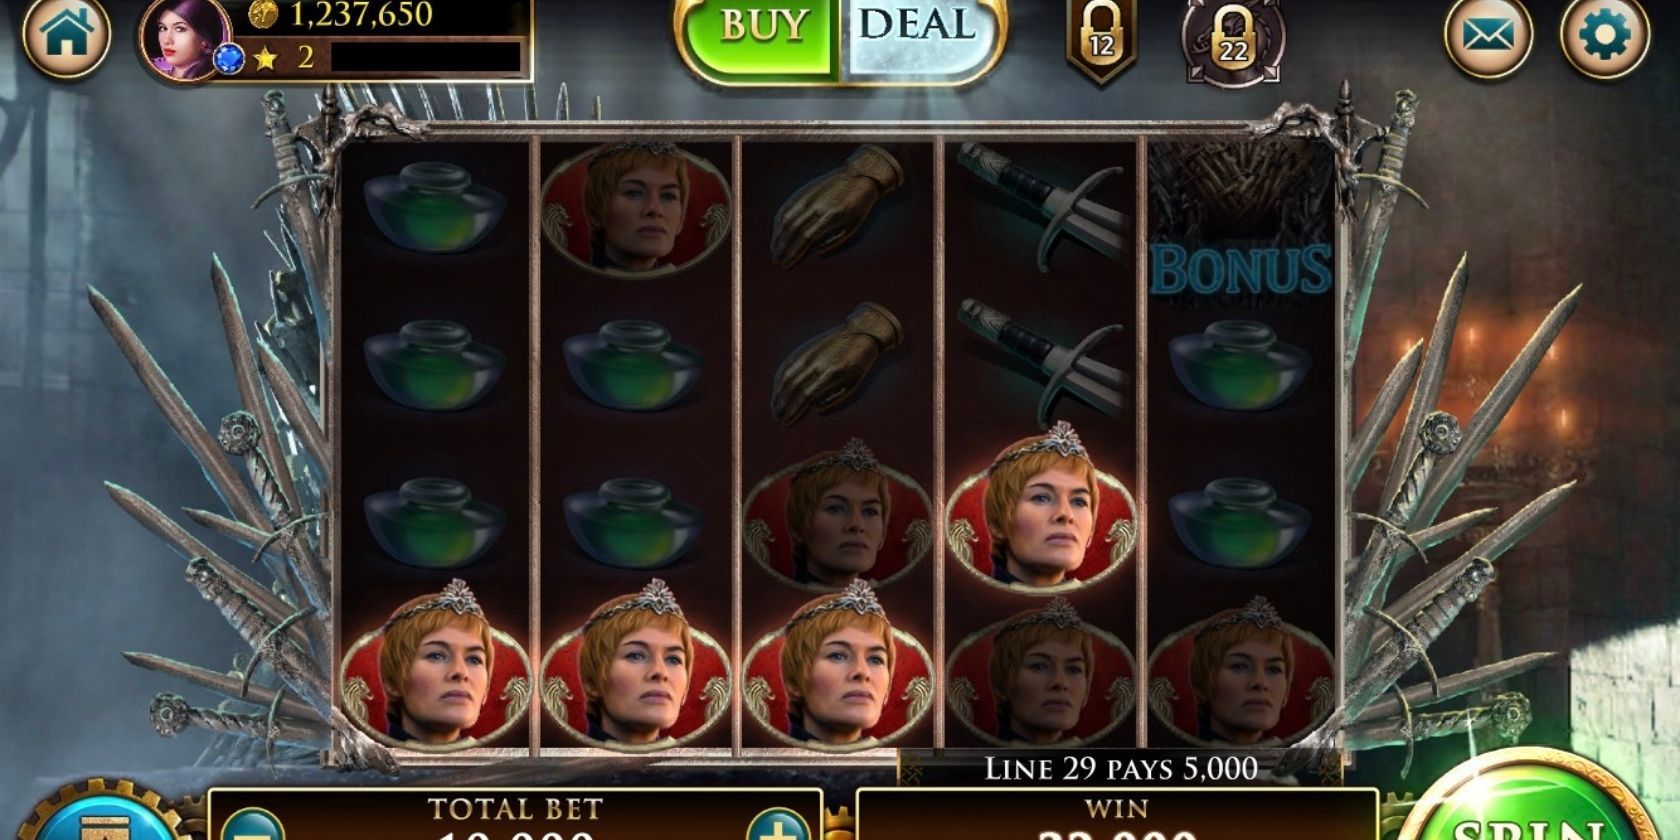 A bet result on the Game of Thrones Slot Casino iOS app.